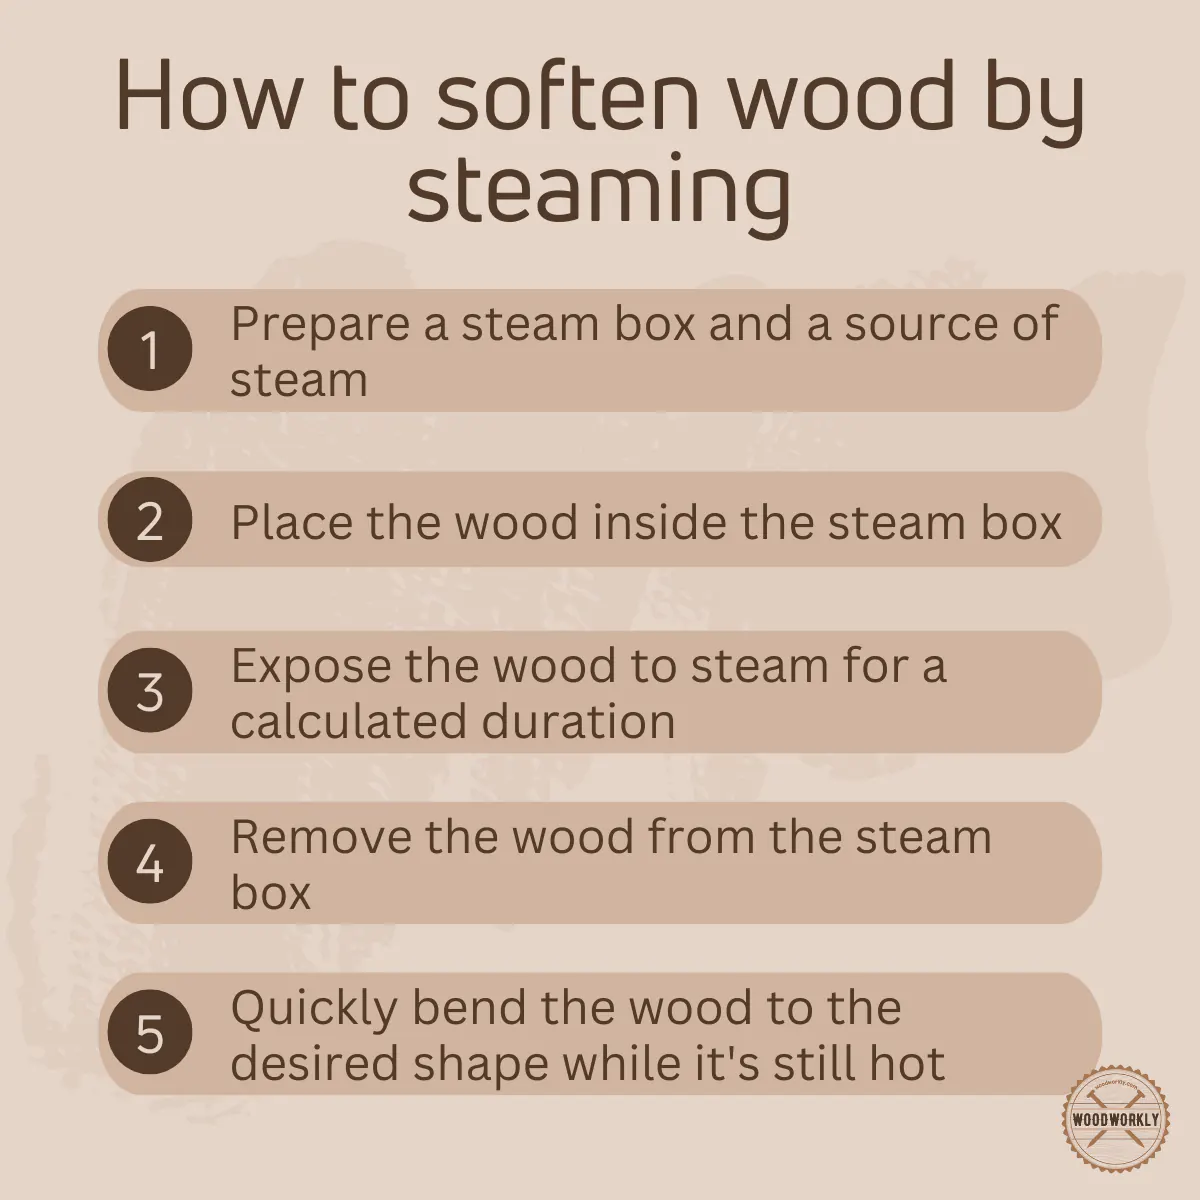 How to soften wood by steaming